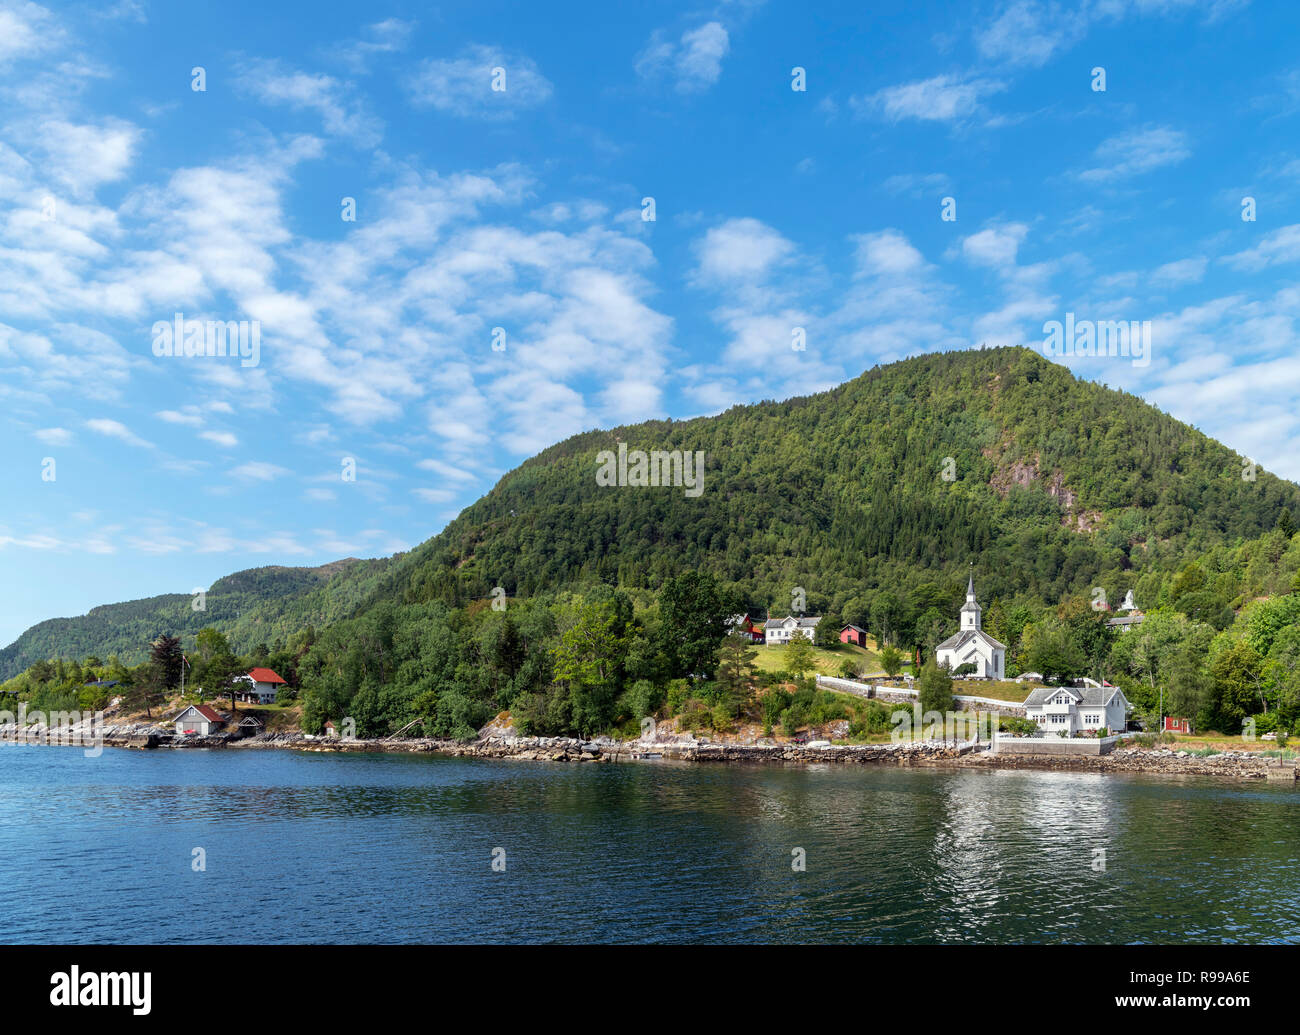 The village of Lavik from the Lavik to Ytre Oppedal ferry, Sognefjord, Sogn og Fjordane, Norway Stock Photo